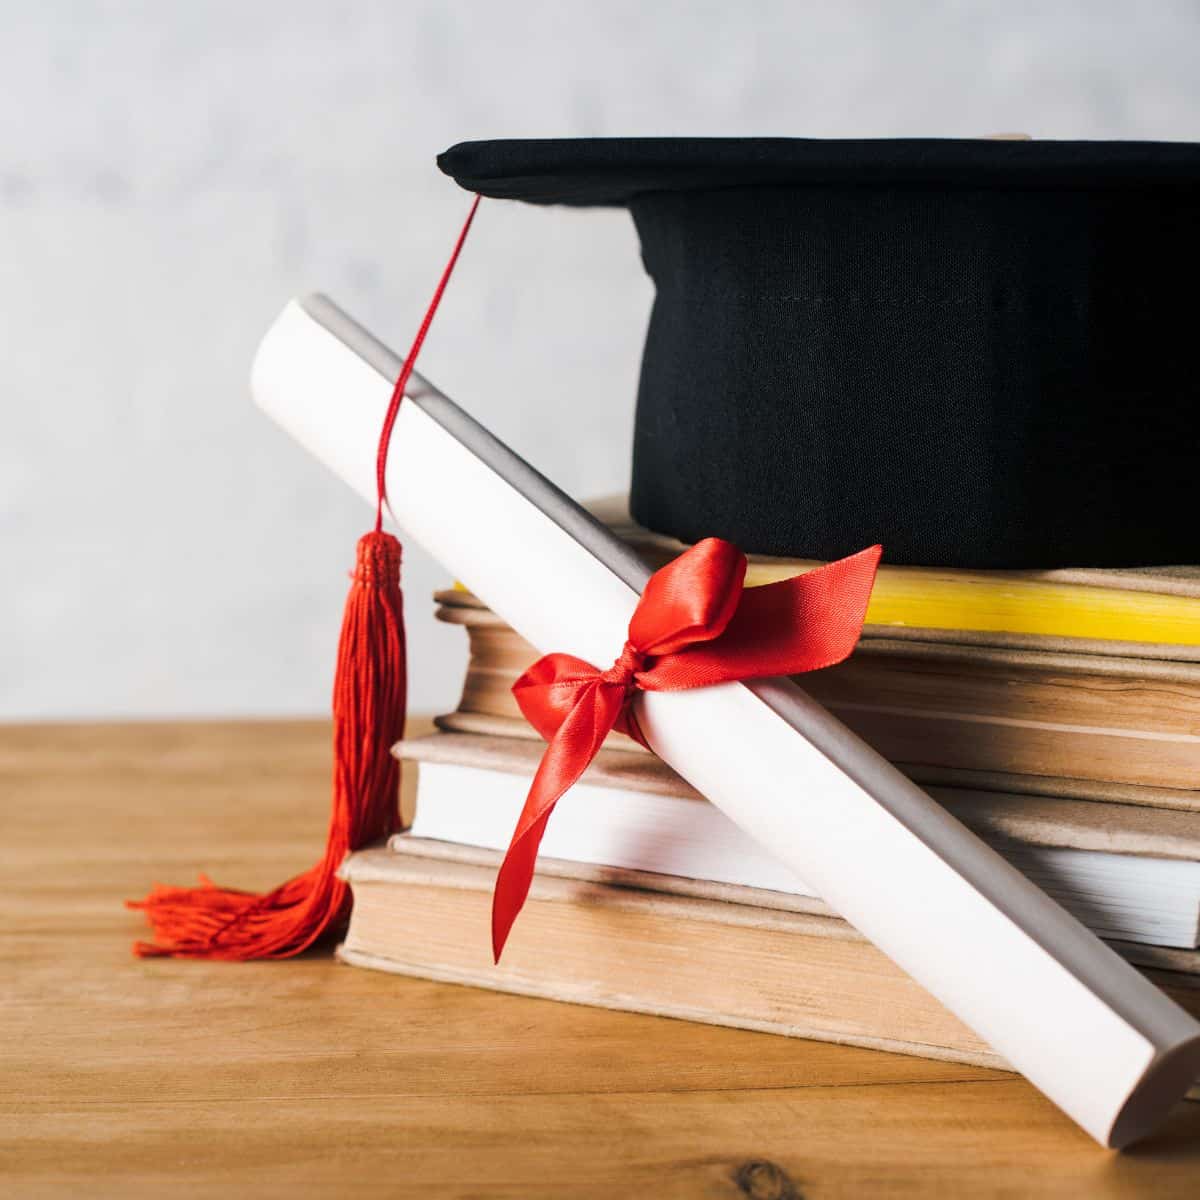 Top 10 Best Books for Graduates: Gifts for High School & College